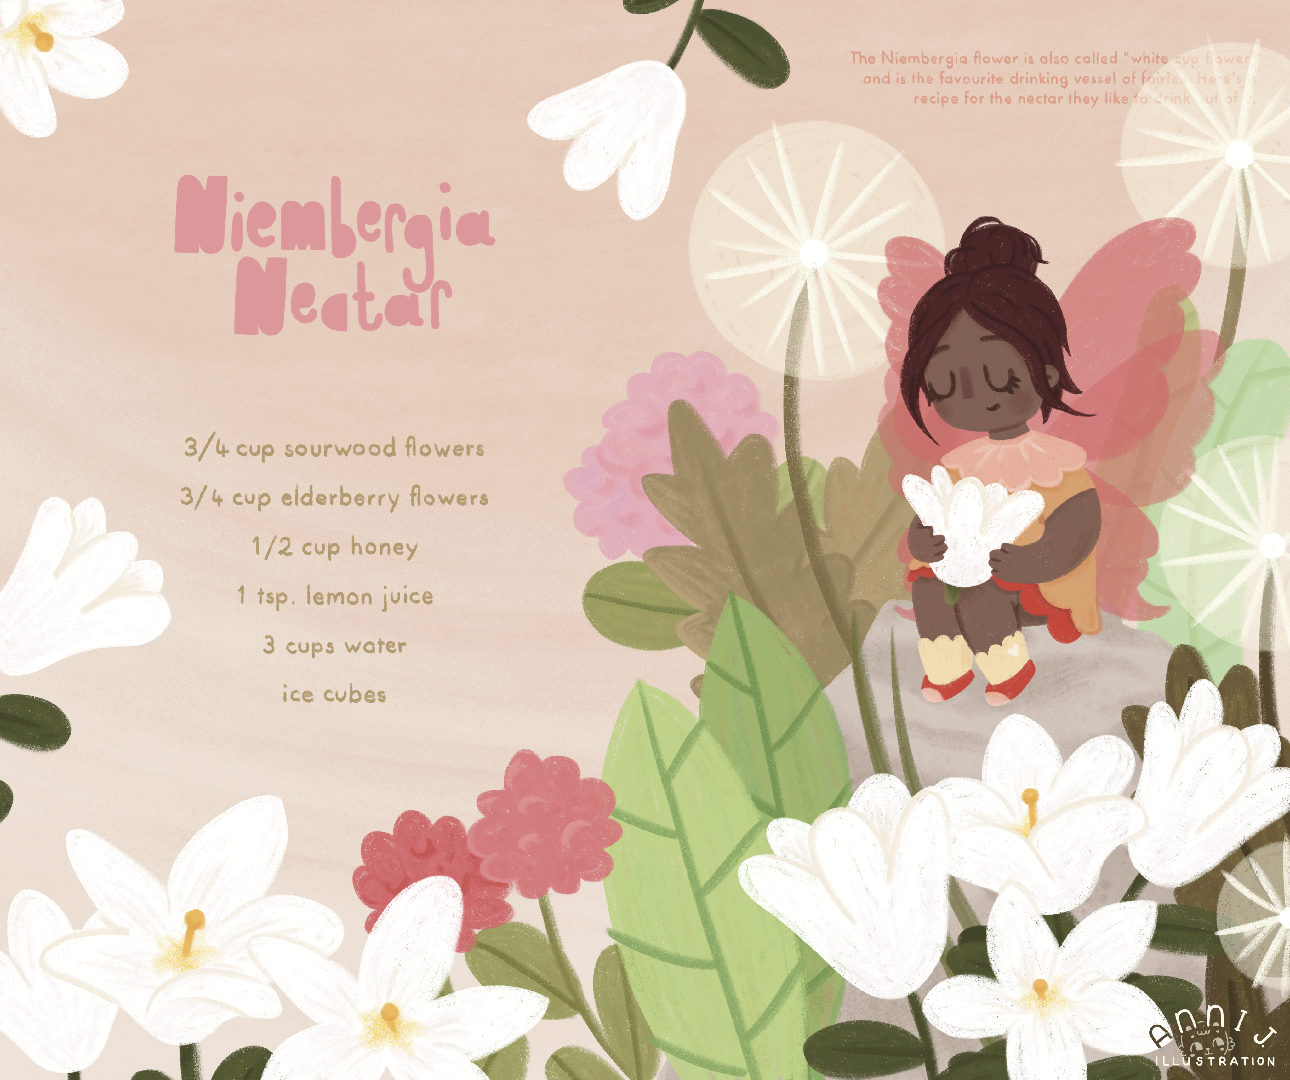 A cute children's book illustration of a fairy sitting among an arrangement of plants and flowers. There are dandelions in the background and the foreground features a lot of Niembergia flowers or cup flowers. The fairy is dressed in a red and orange dress and has pink wings. She is holding one of the flowers like a cup. On the left hand side you can see a recipe for a drink called "Niembergia Nectar"